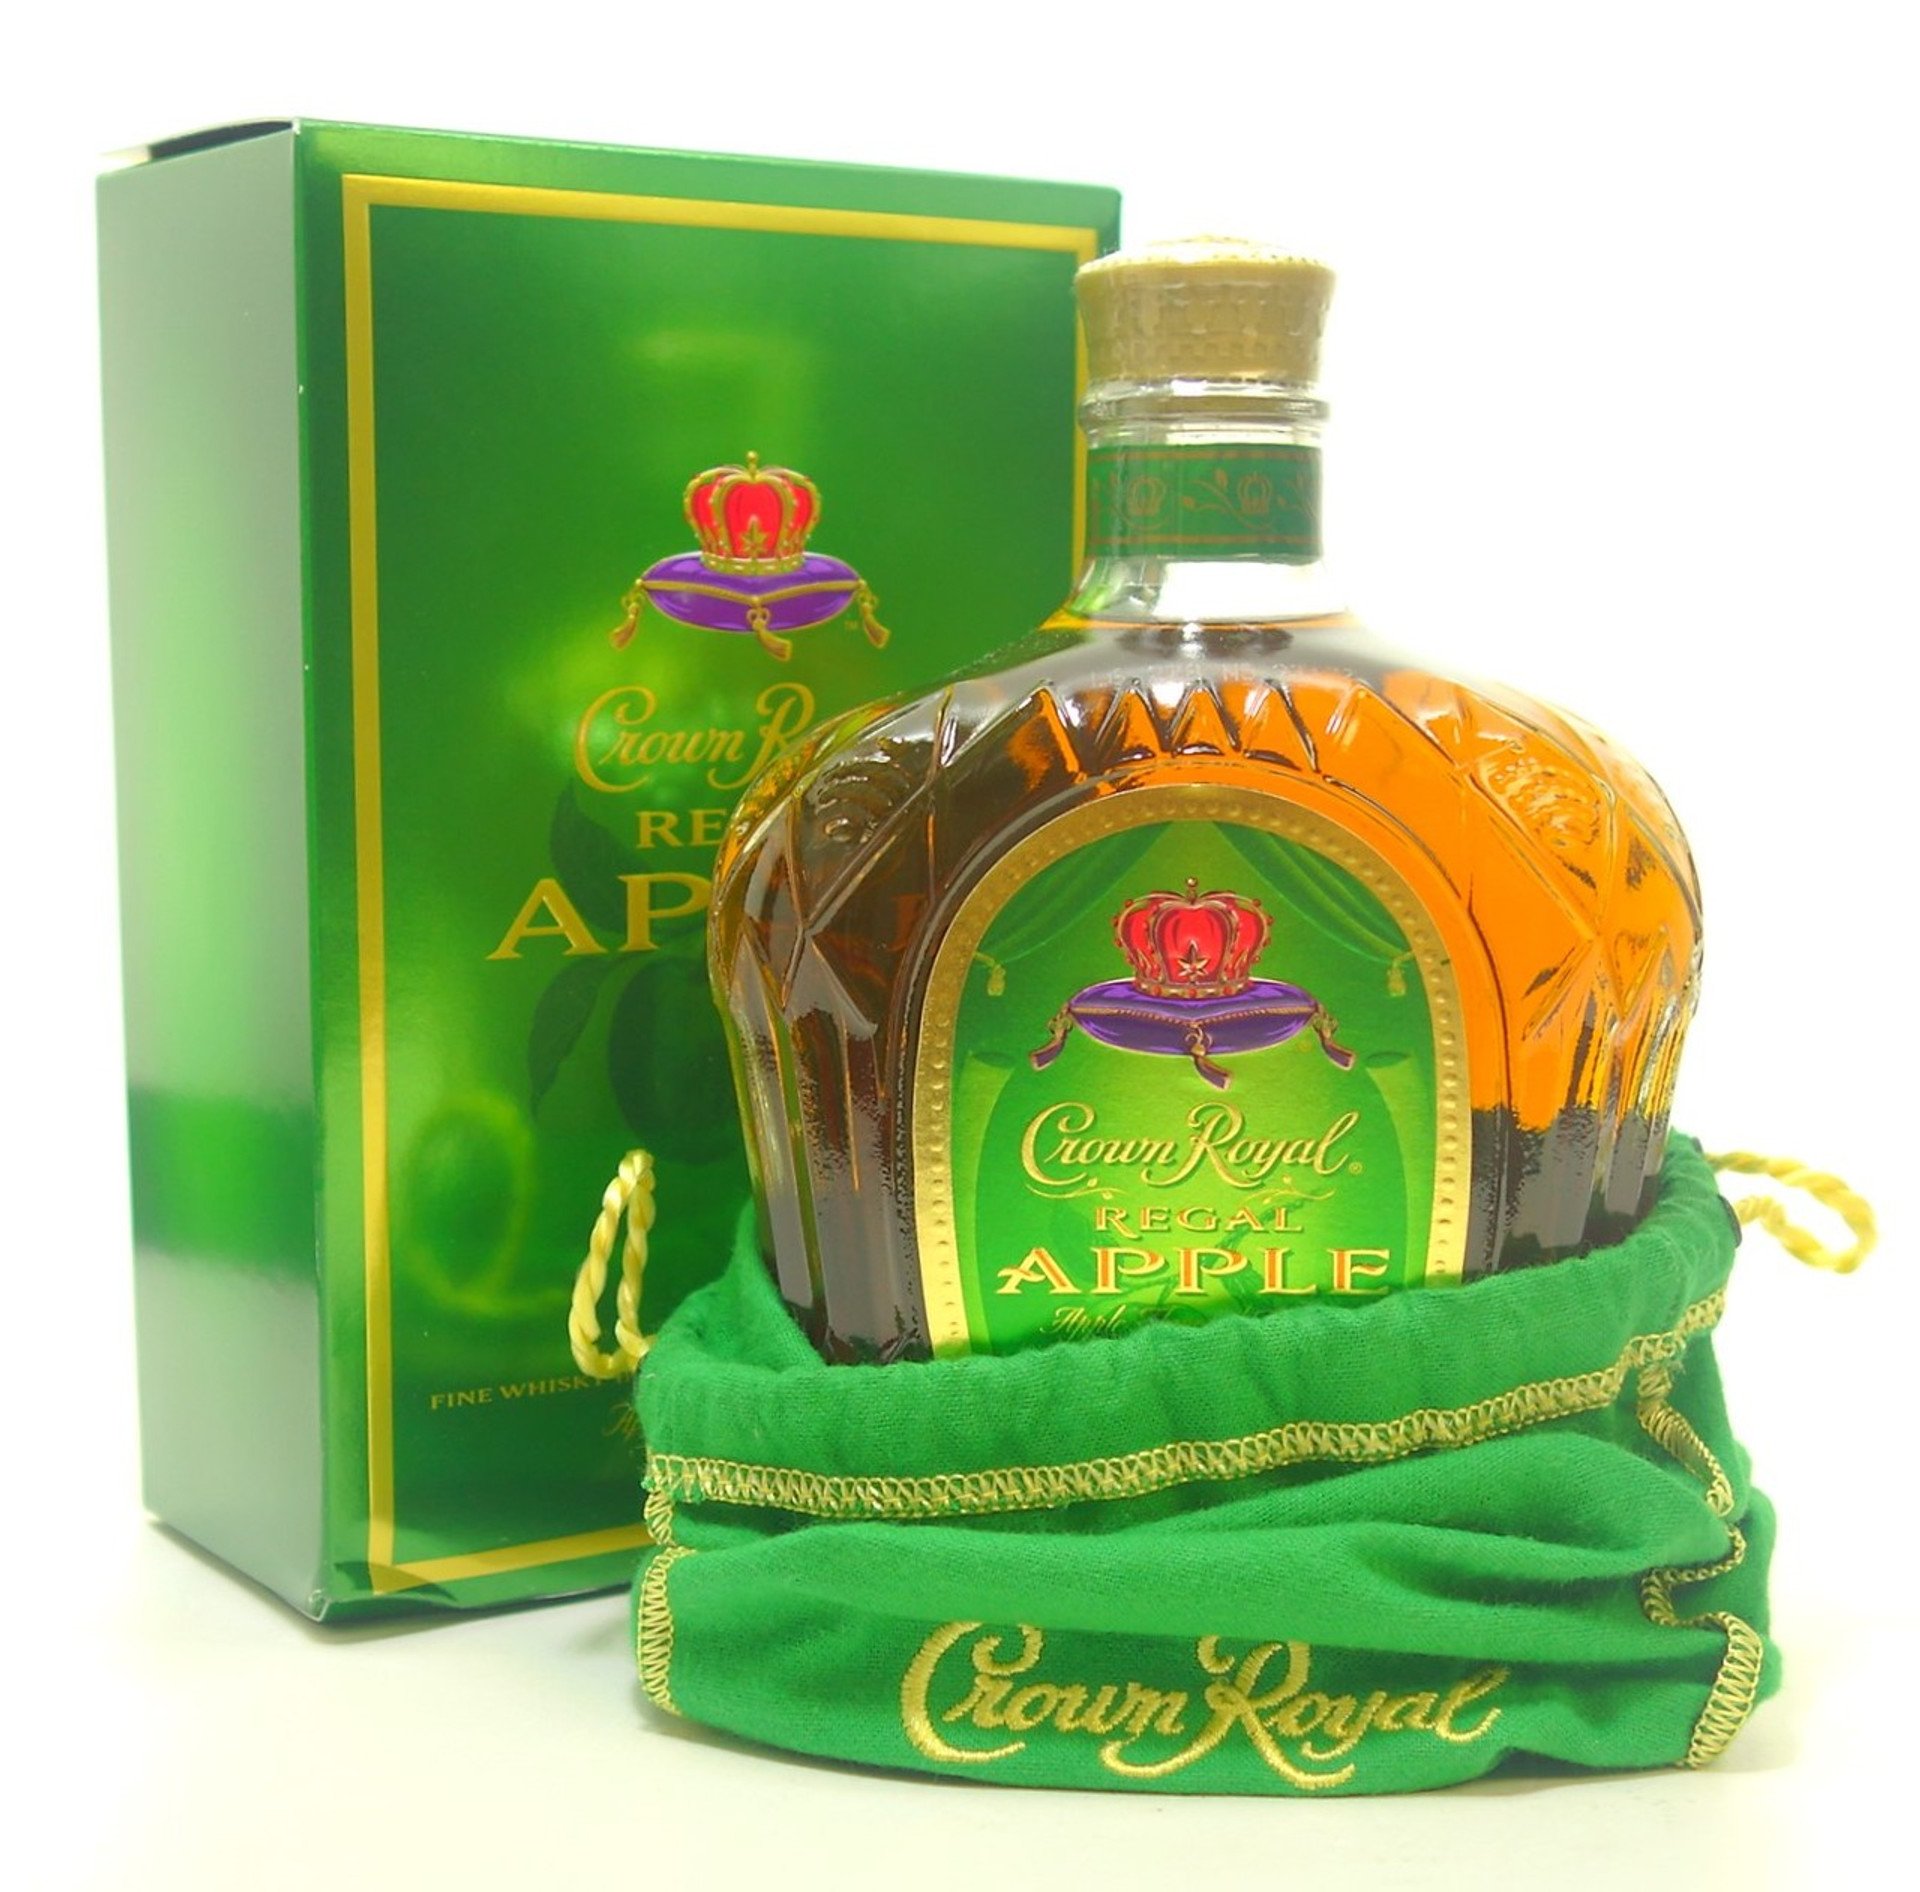 Crown Royal Washington Apple Whisky 4 Pack - Old Town Tequila